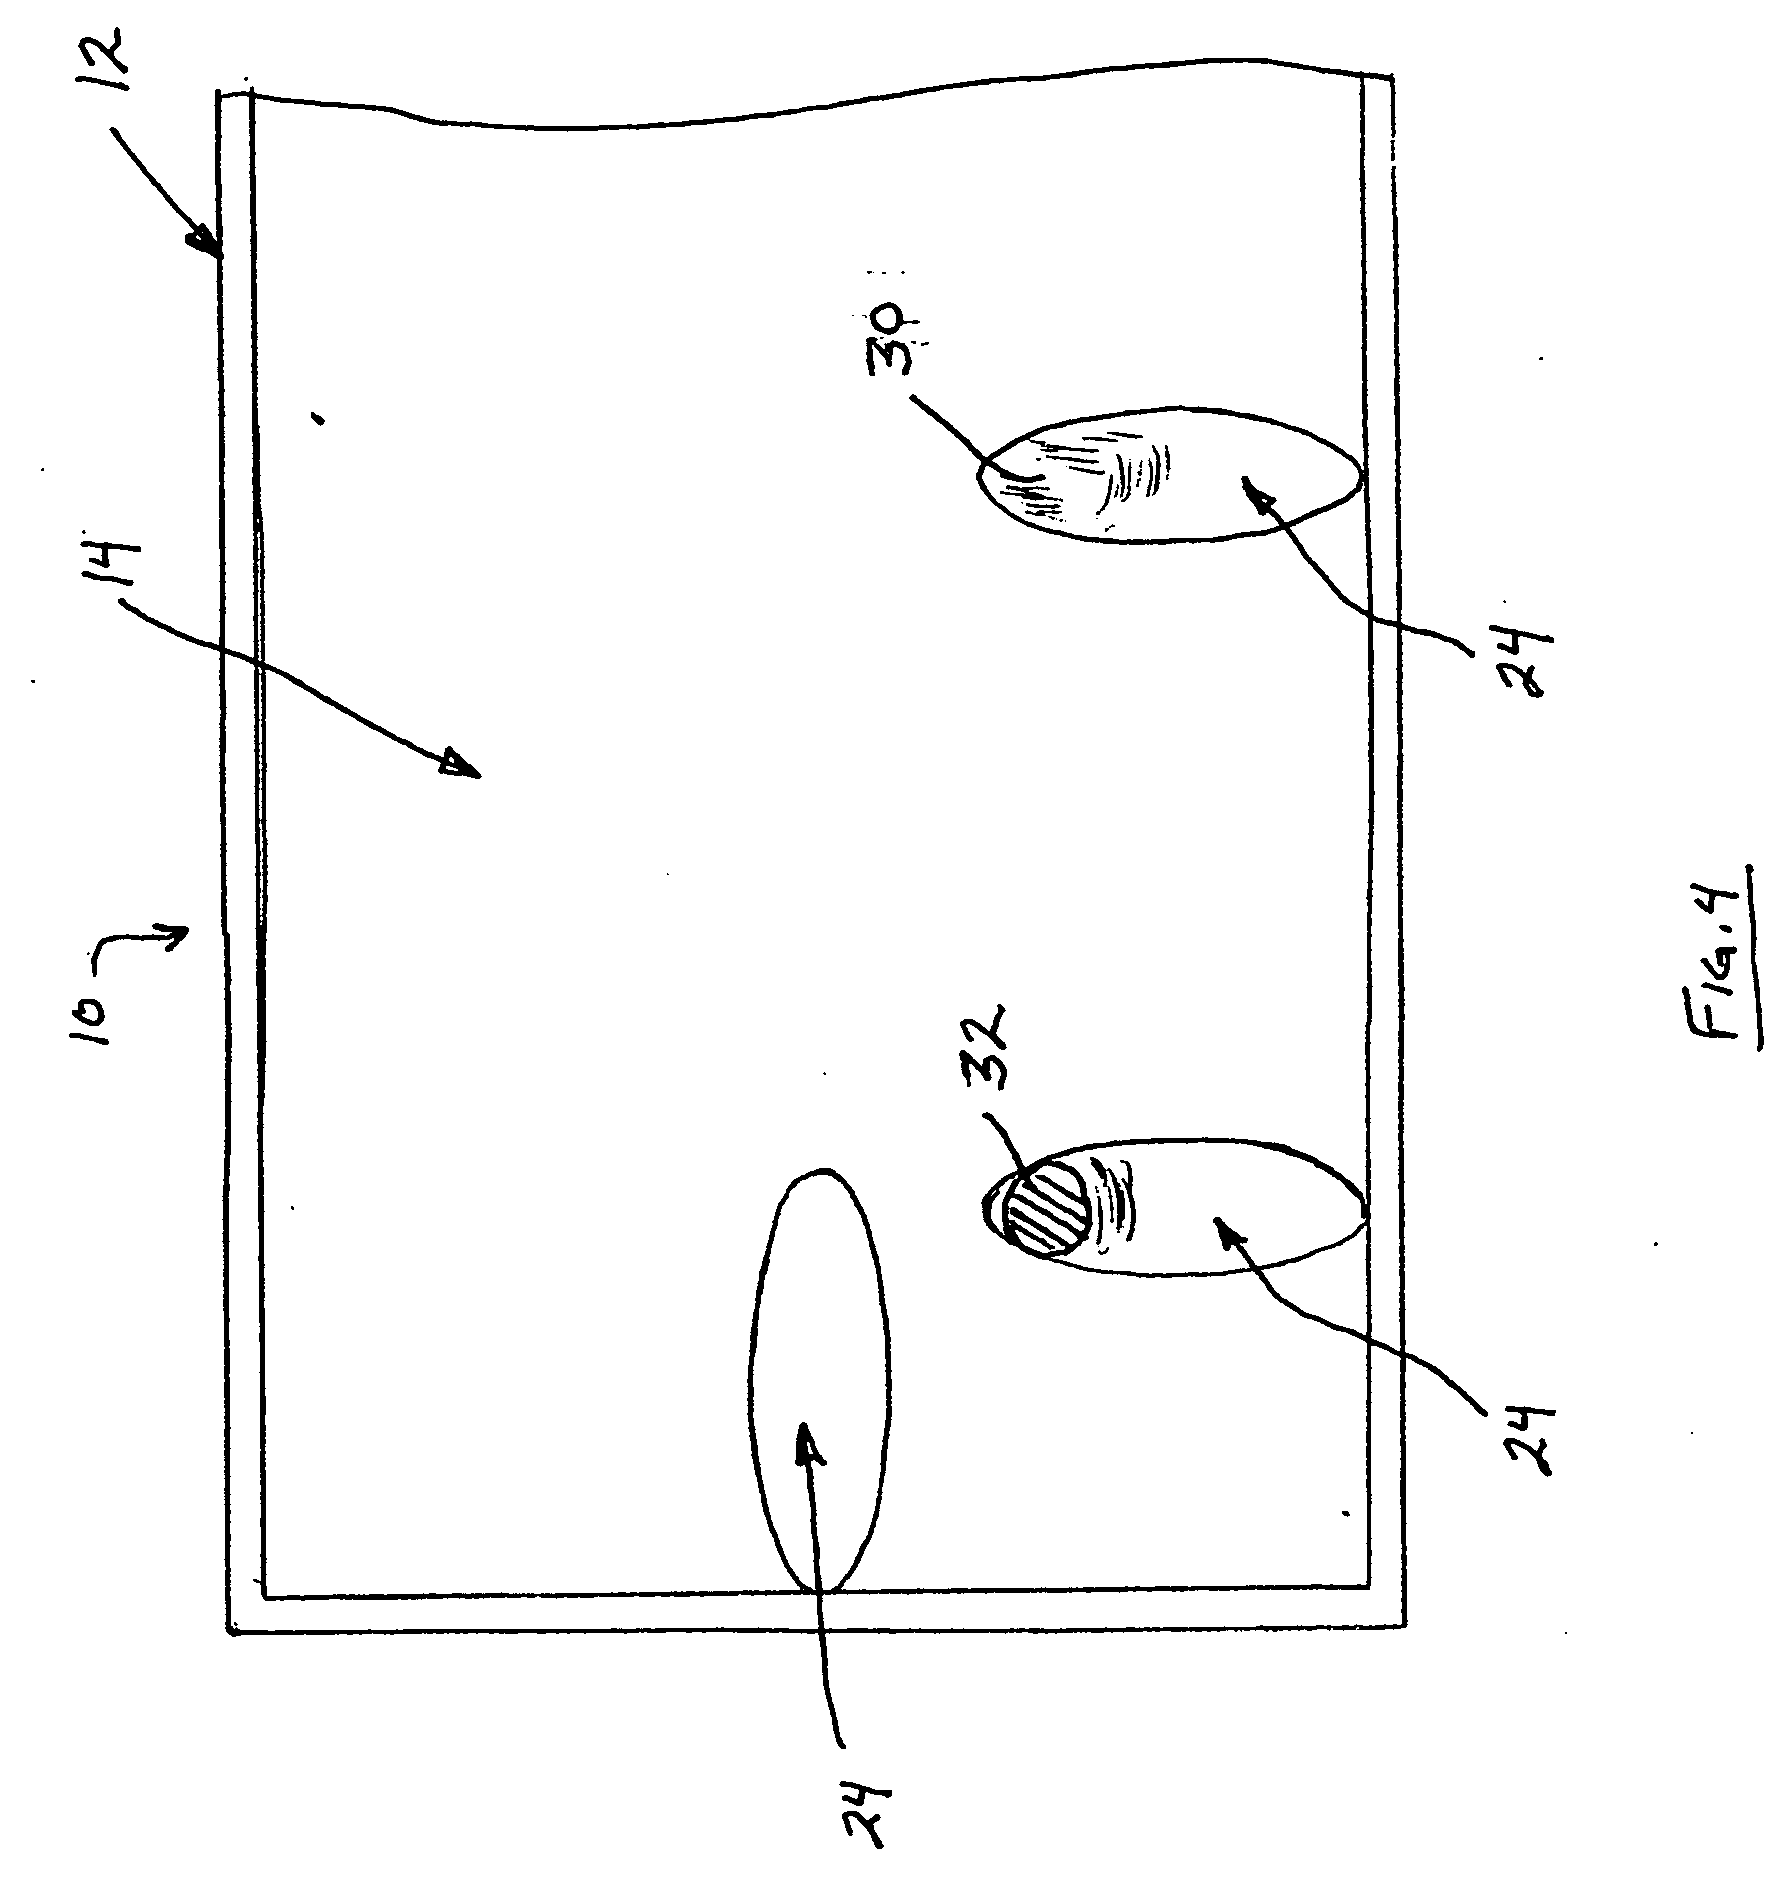 Message holding device for removably suspending one or more articles therefrom